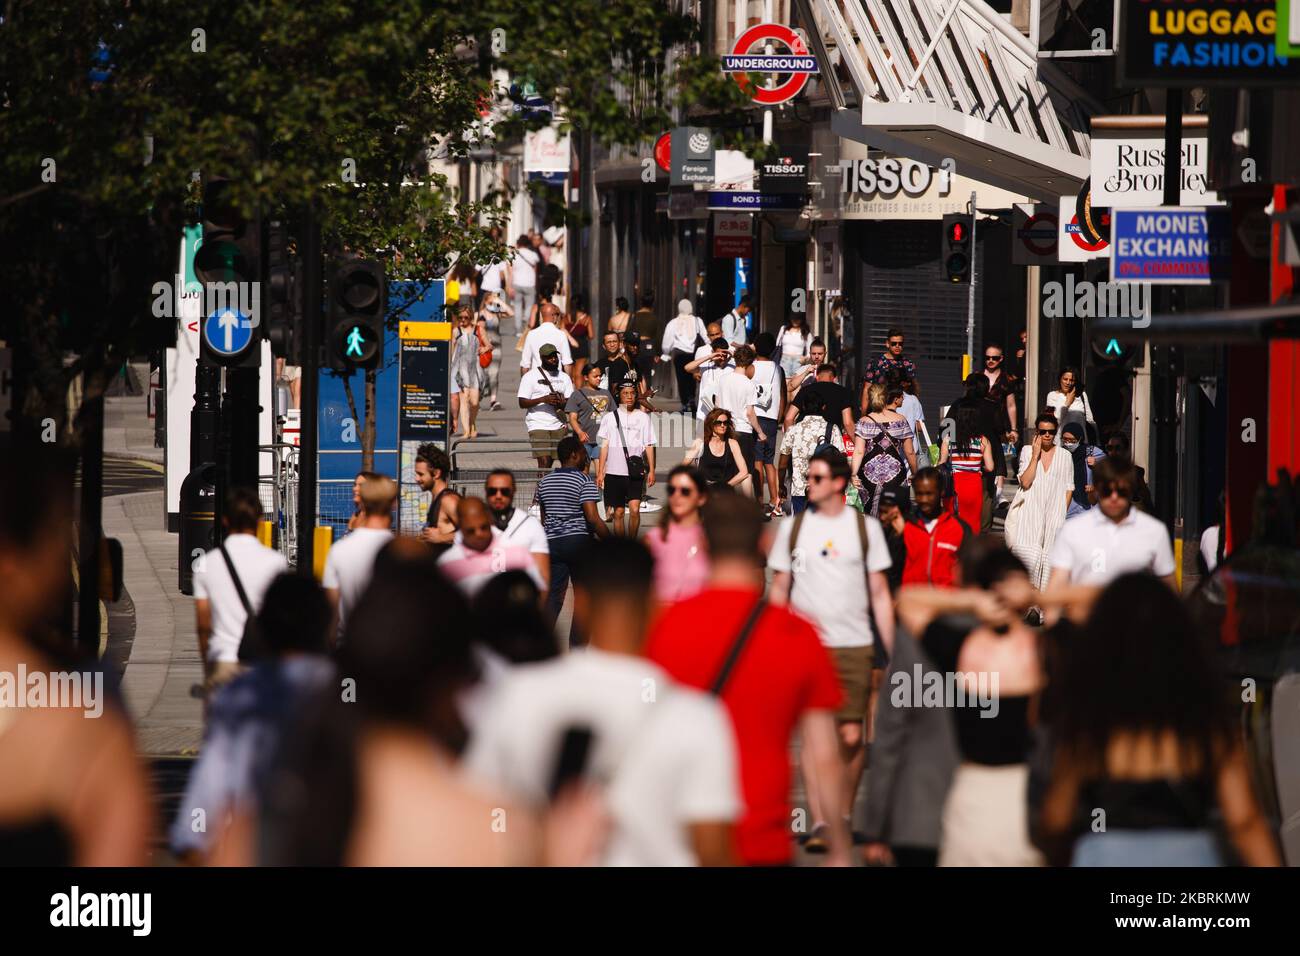 Shoppers walk along Oxford Street in heatwave conditions in London, England, on June 25, 2020. Temperatures rose to 33C in parts of London today, in what has been one of the UK's hottest days of the year so far. Central London was nonetheless busy with shoppers this afternoon as the retail sector mounts its comeback after coronavirus lockdown restrictions on non-essential shops were eased at the beginning of last week. Among retailers, confidence is reportedly low that recovery will be swift, however, with a survey from the Confederation of British Industry (CBI) today revealing fears of reduc Stock Photo